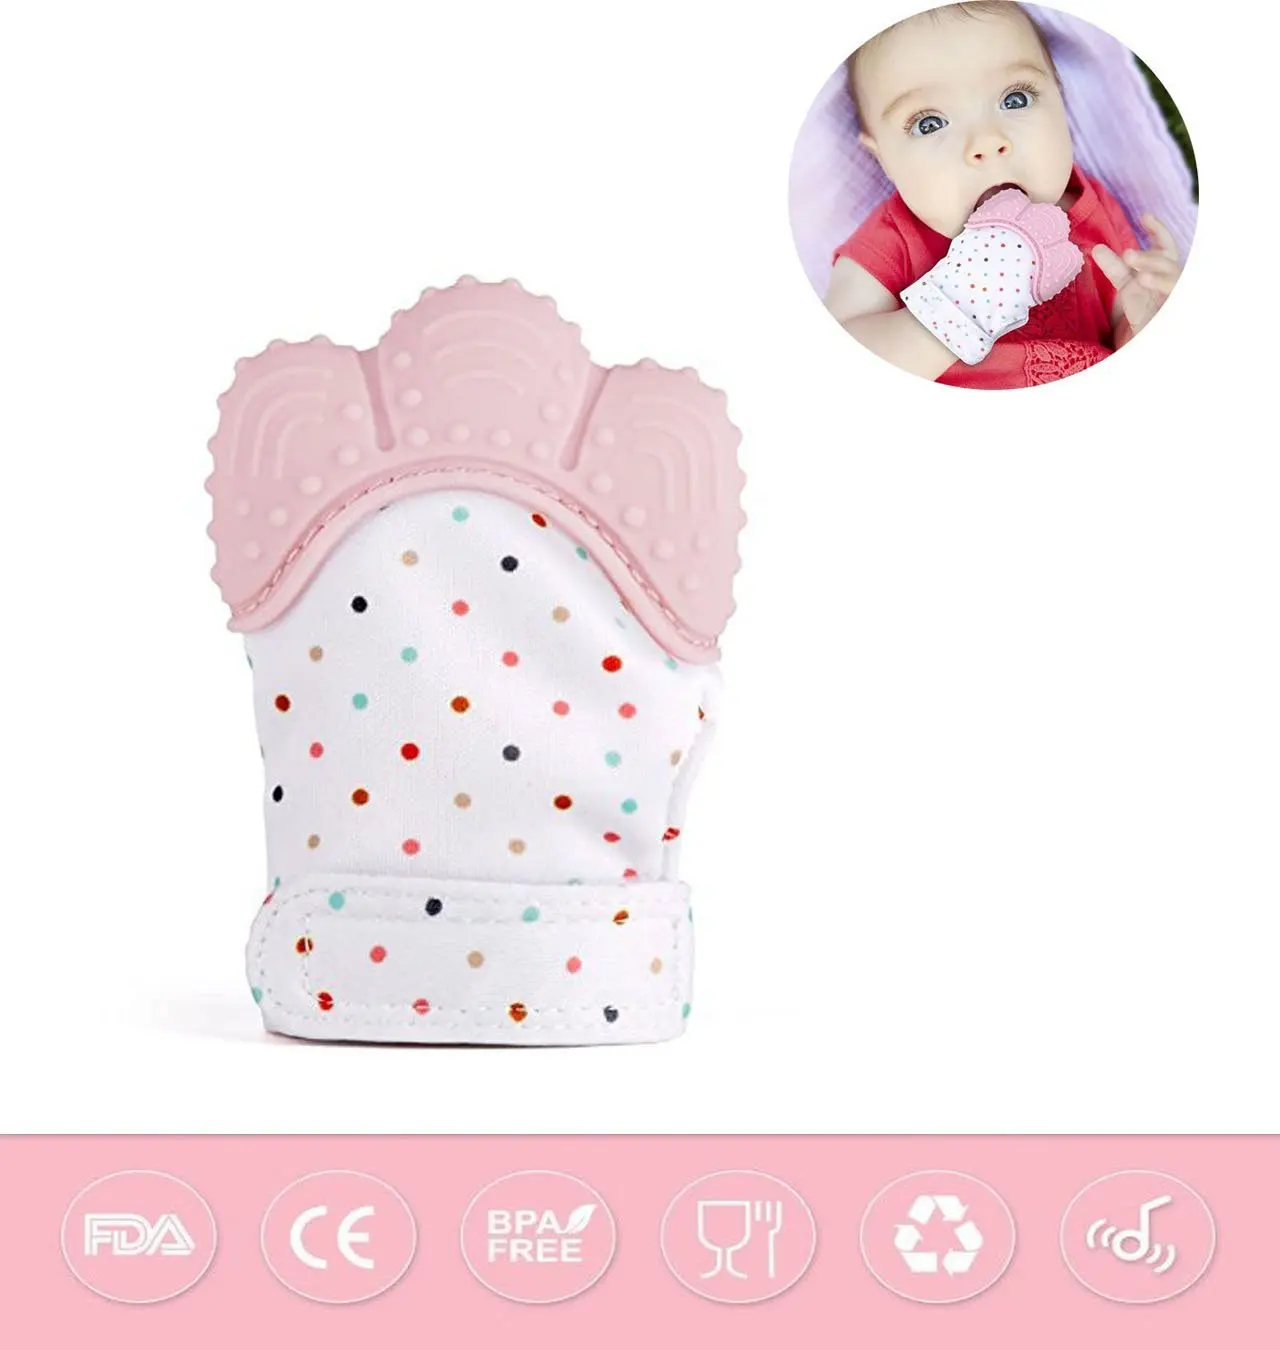 cloth teethers for babies